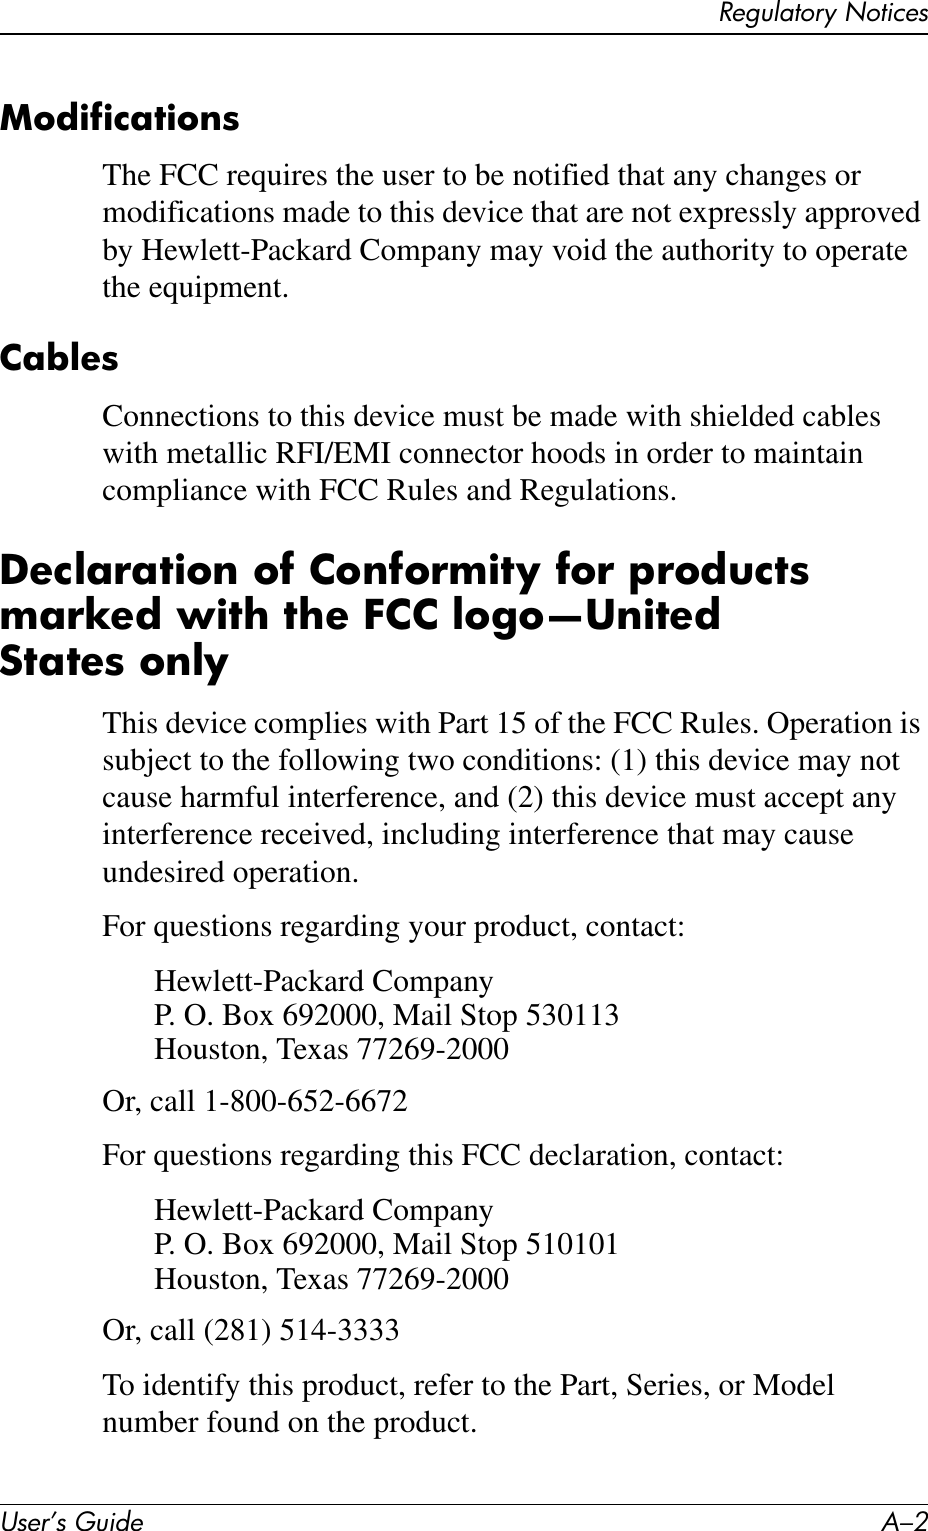 User’s Guide A–2Regulatory NoticesModificationsThe FCC requires the user to be notified that any changes or modifications made to this device that are not expressly approved by Hewlett-Packard Company may void the authority to operate the equipment.CablesConnections to this device must be made with shielded cables with metallic RFI/EMI connector hoods in order to maintain compliance with FCC Rules and Regulations.Declaration of Conformity for products marked with the FCC logo—United States onlyThis device complies with Part 15 of the FCC Rules. Operation is subject to the following two conditions: (1) this device may not cause harmful interference, and (2) this device must accept any interference received, including interference that may cause undesired operation.For questions regarding your product, contact:Hewlett-Packard CompanyP. O. Box 692000, Mail Stop 530113Houston, Texas 77269-2000Or, call 1-800-652-6672For questions regarding this FCC declaration, contact:Hewlett-Packard CompanyP. O. Box 692000, Mail Stop 510101Houston, Texas 77269-2000Or, call (281) 514-3333To identify this product, refer to the Part, Series, or Model number found on the product.